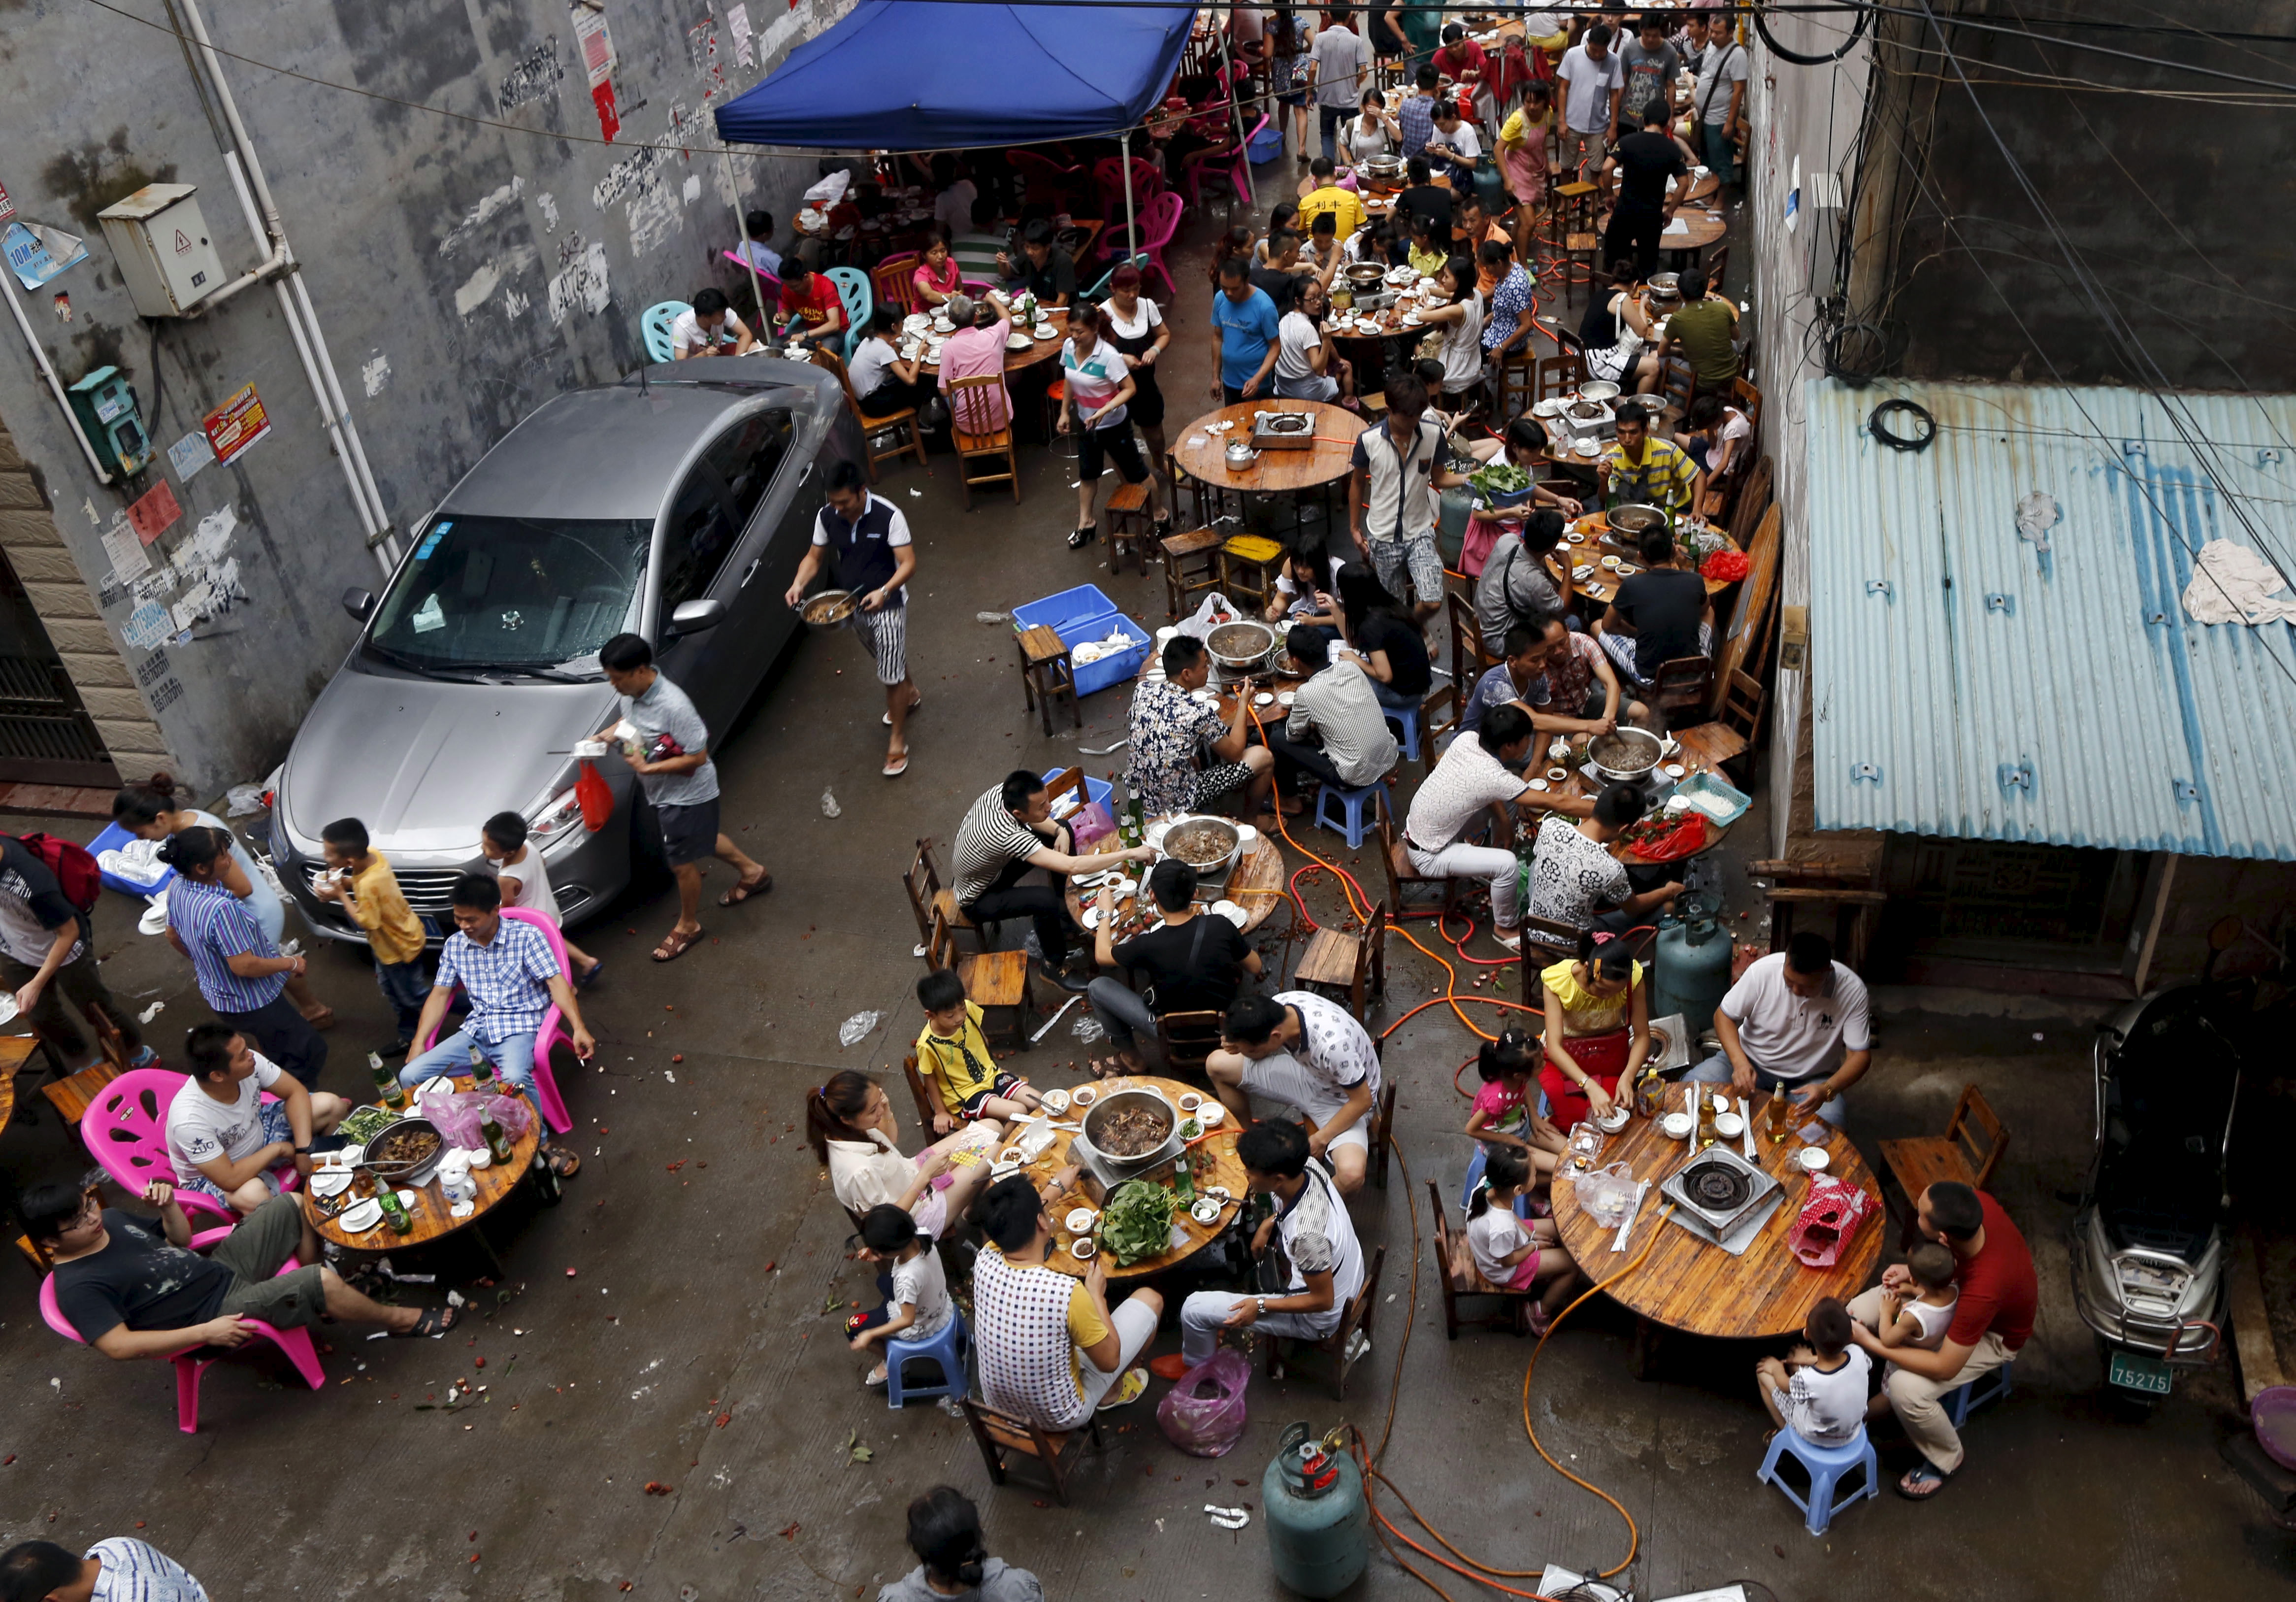 People eat dog meat at a dog-meat restaurant district during the Yulin Dog Meat Festival in the Chinese city of Yulin, Guangxi Zhuang Autonomous Region, on June 22, 2015 (Kim Kyung Horn—Reuters)